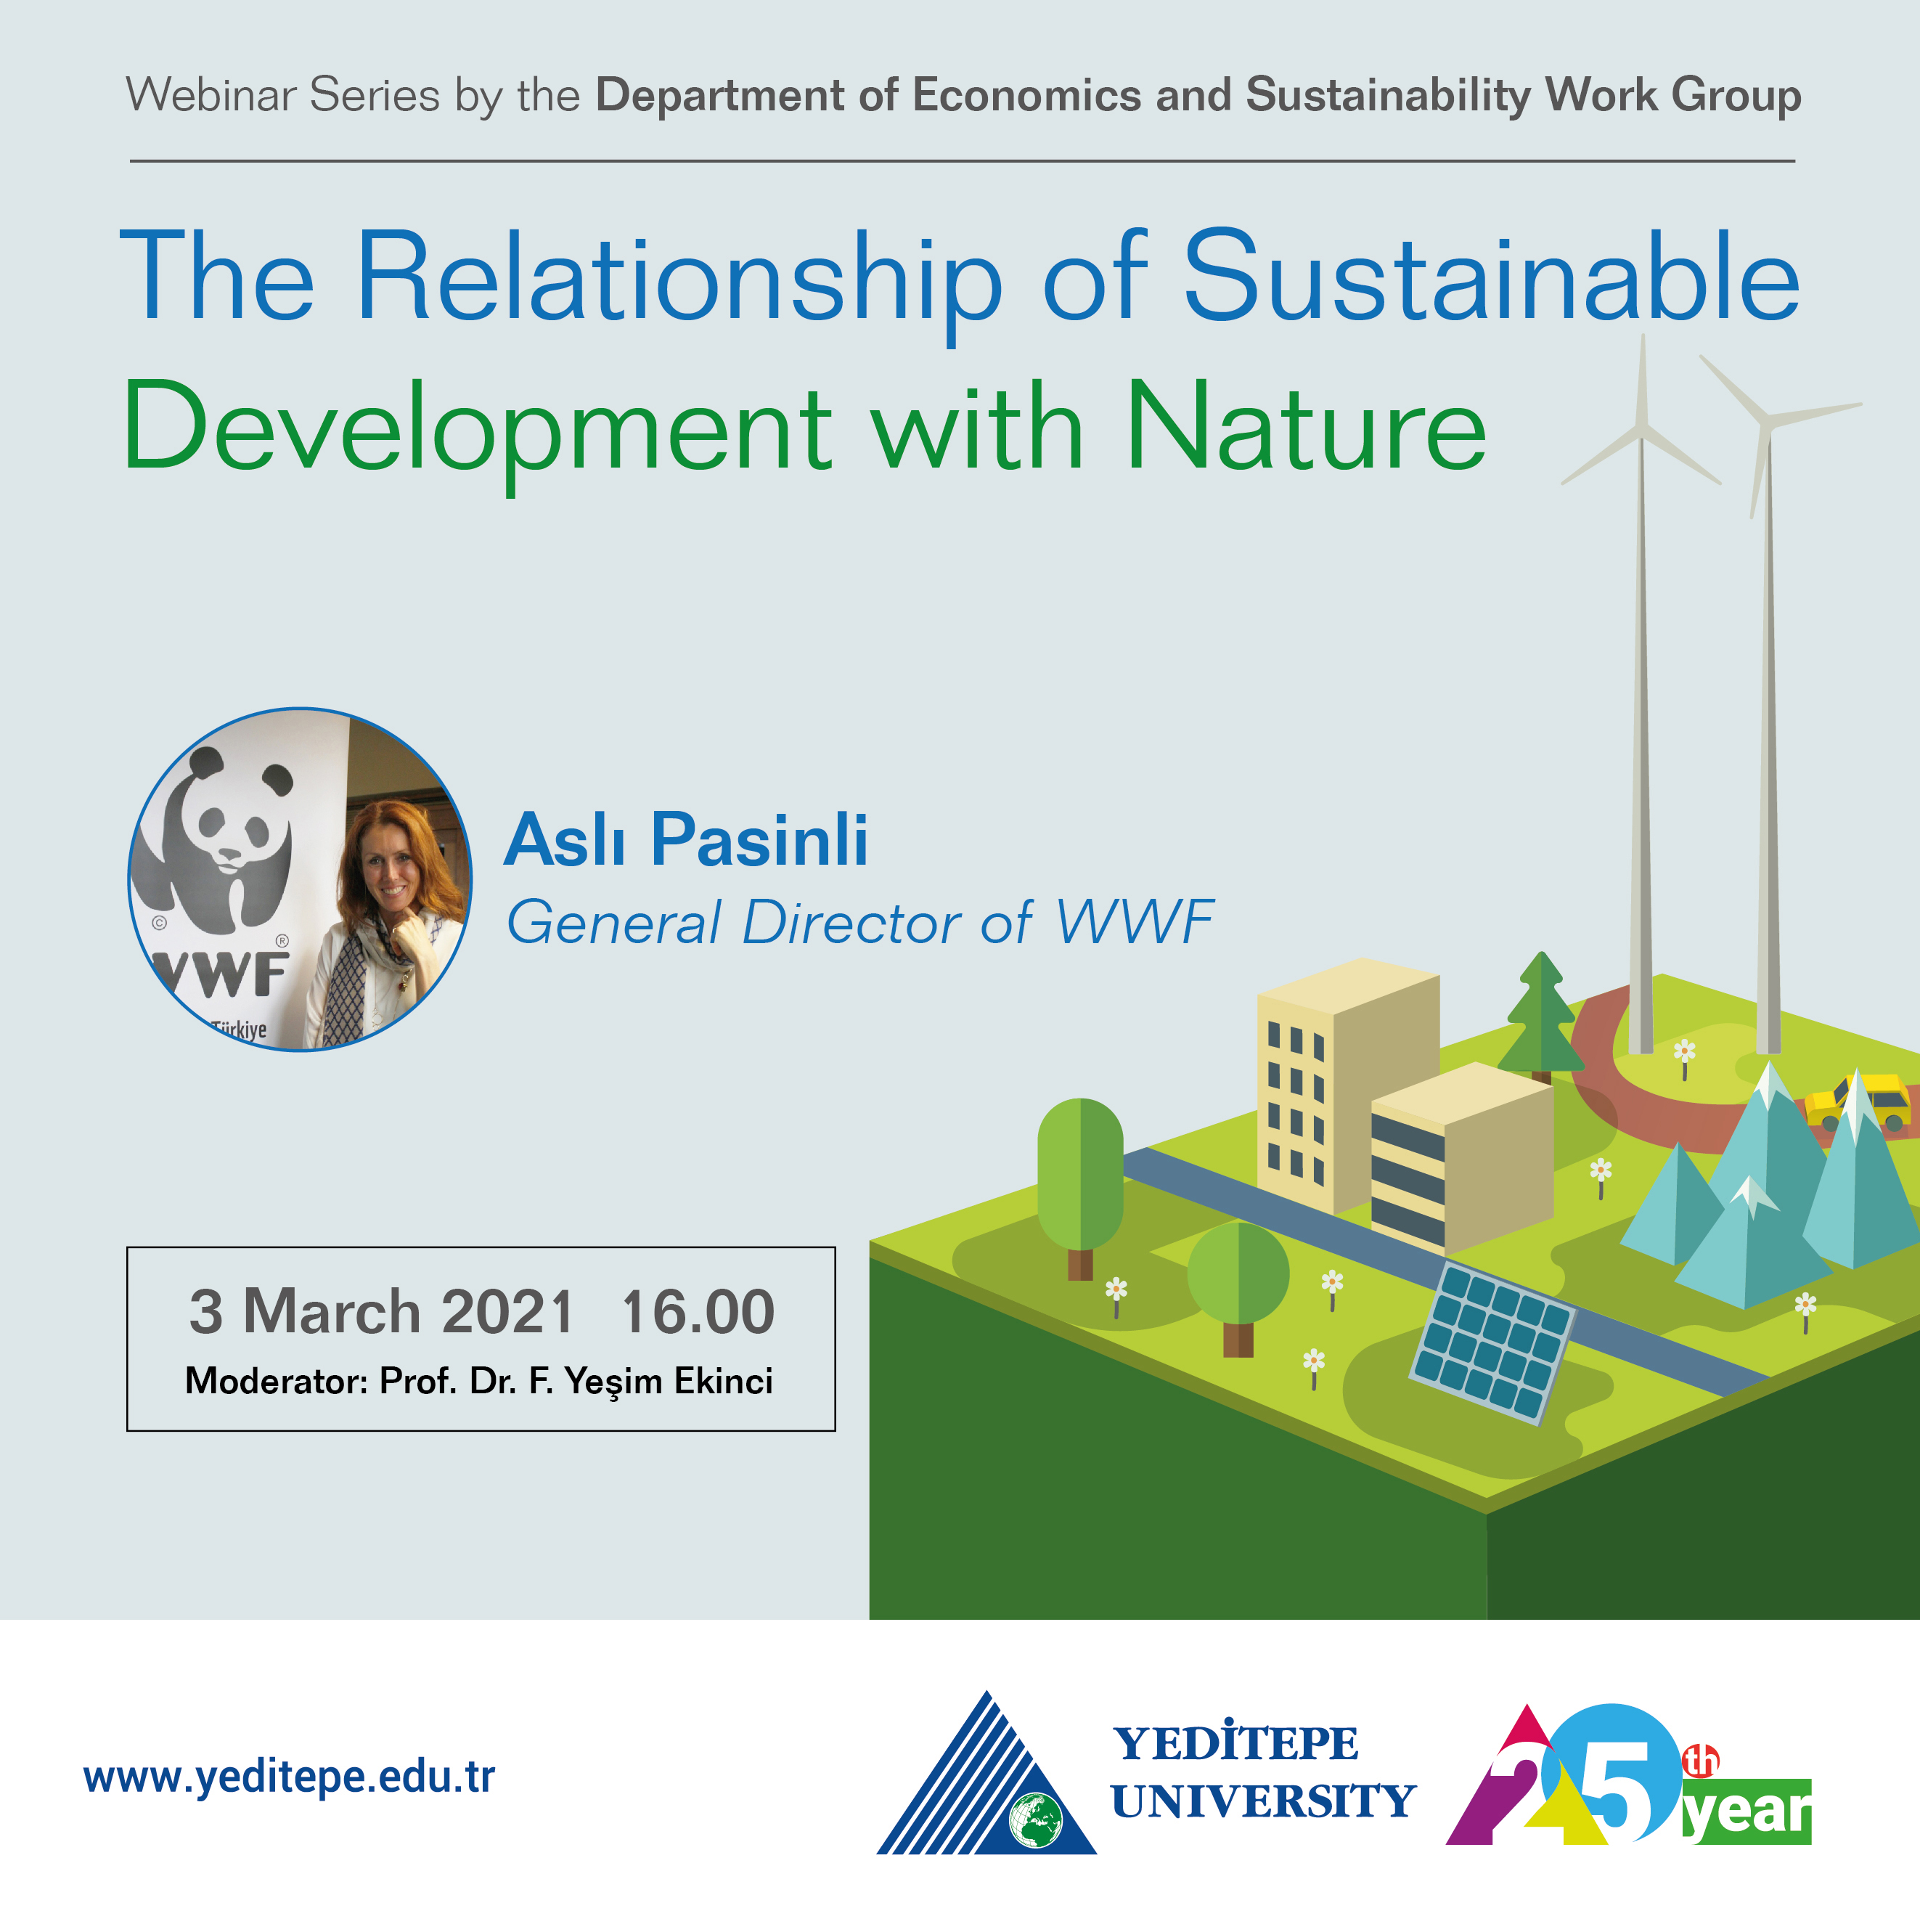 The Relationship of Sustainable Development with Nature